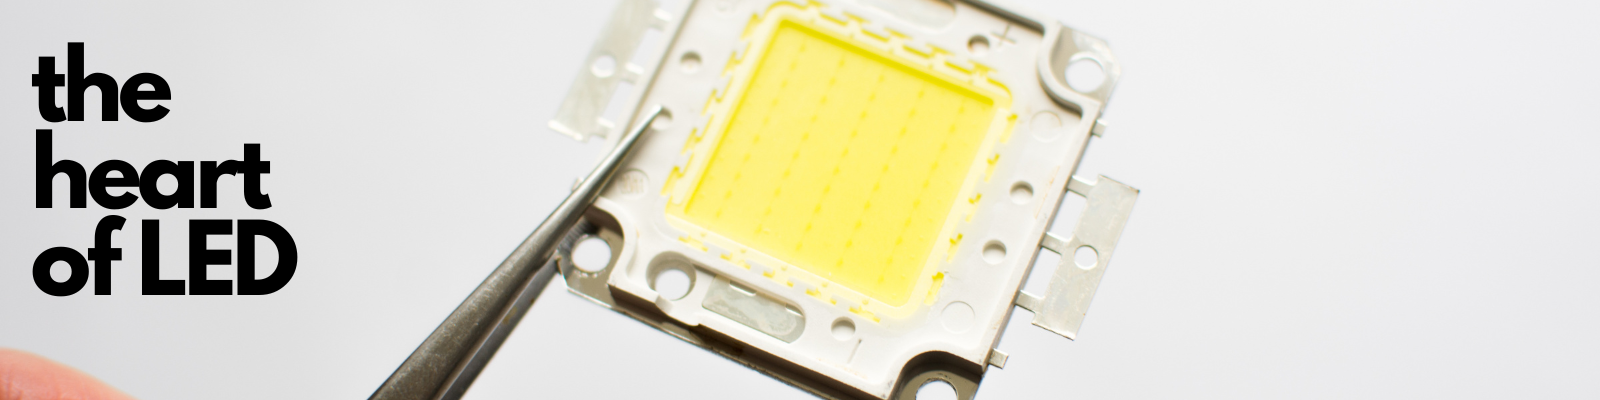 led chip in a bulb